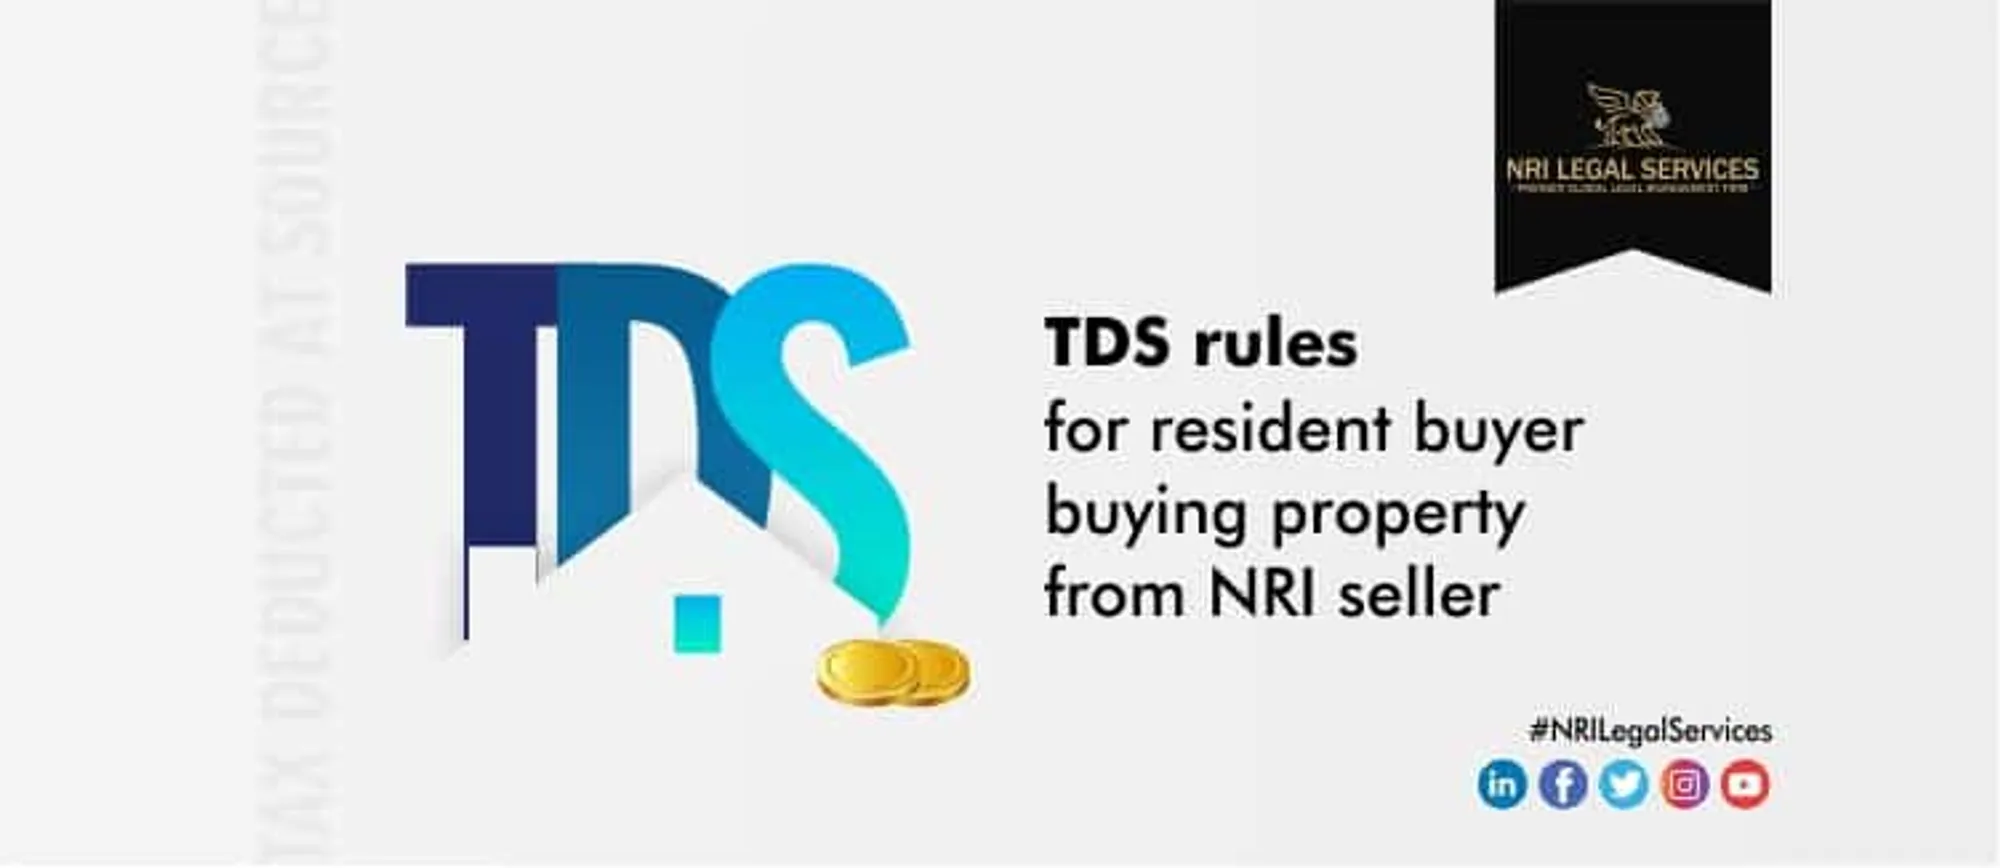 TDS-rules-for-resident-buyer-buying-property-from-NRI-seller